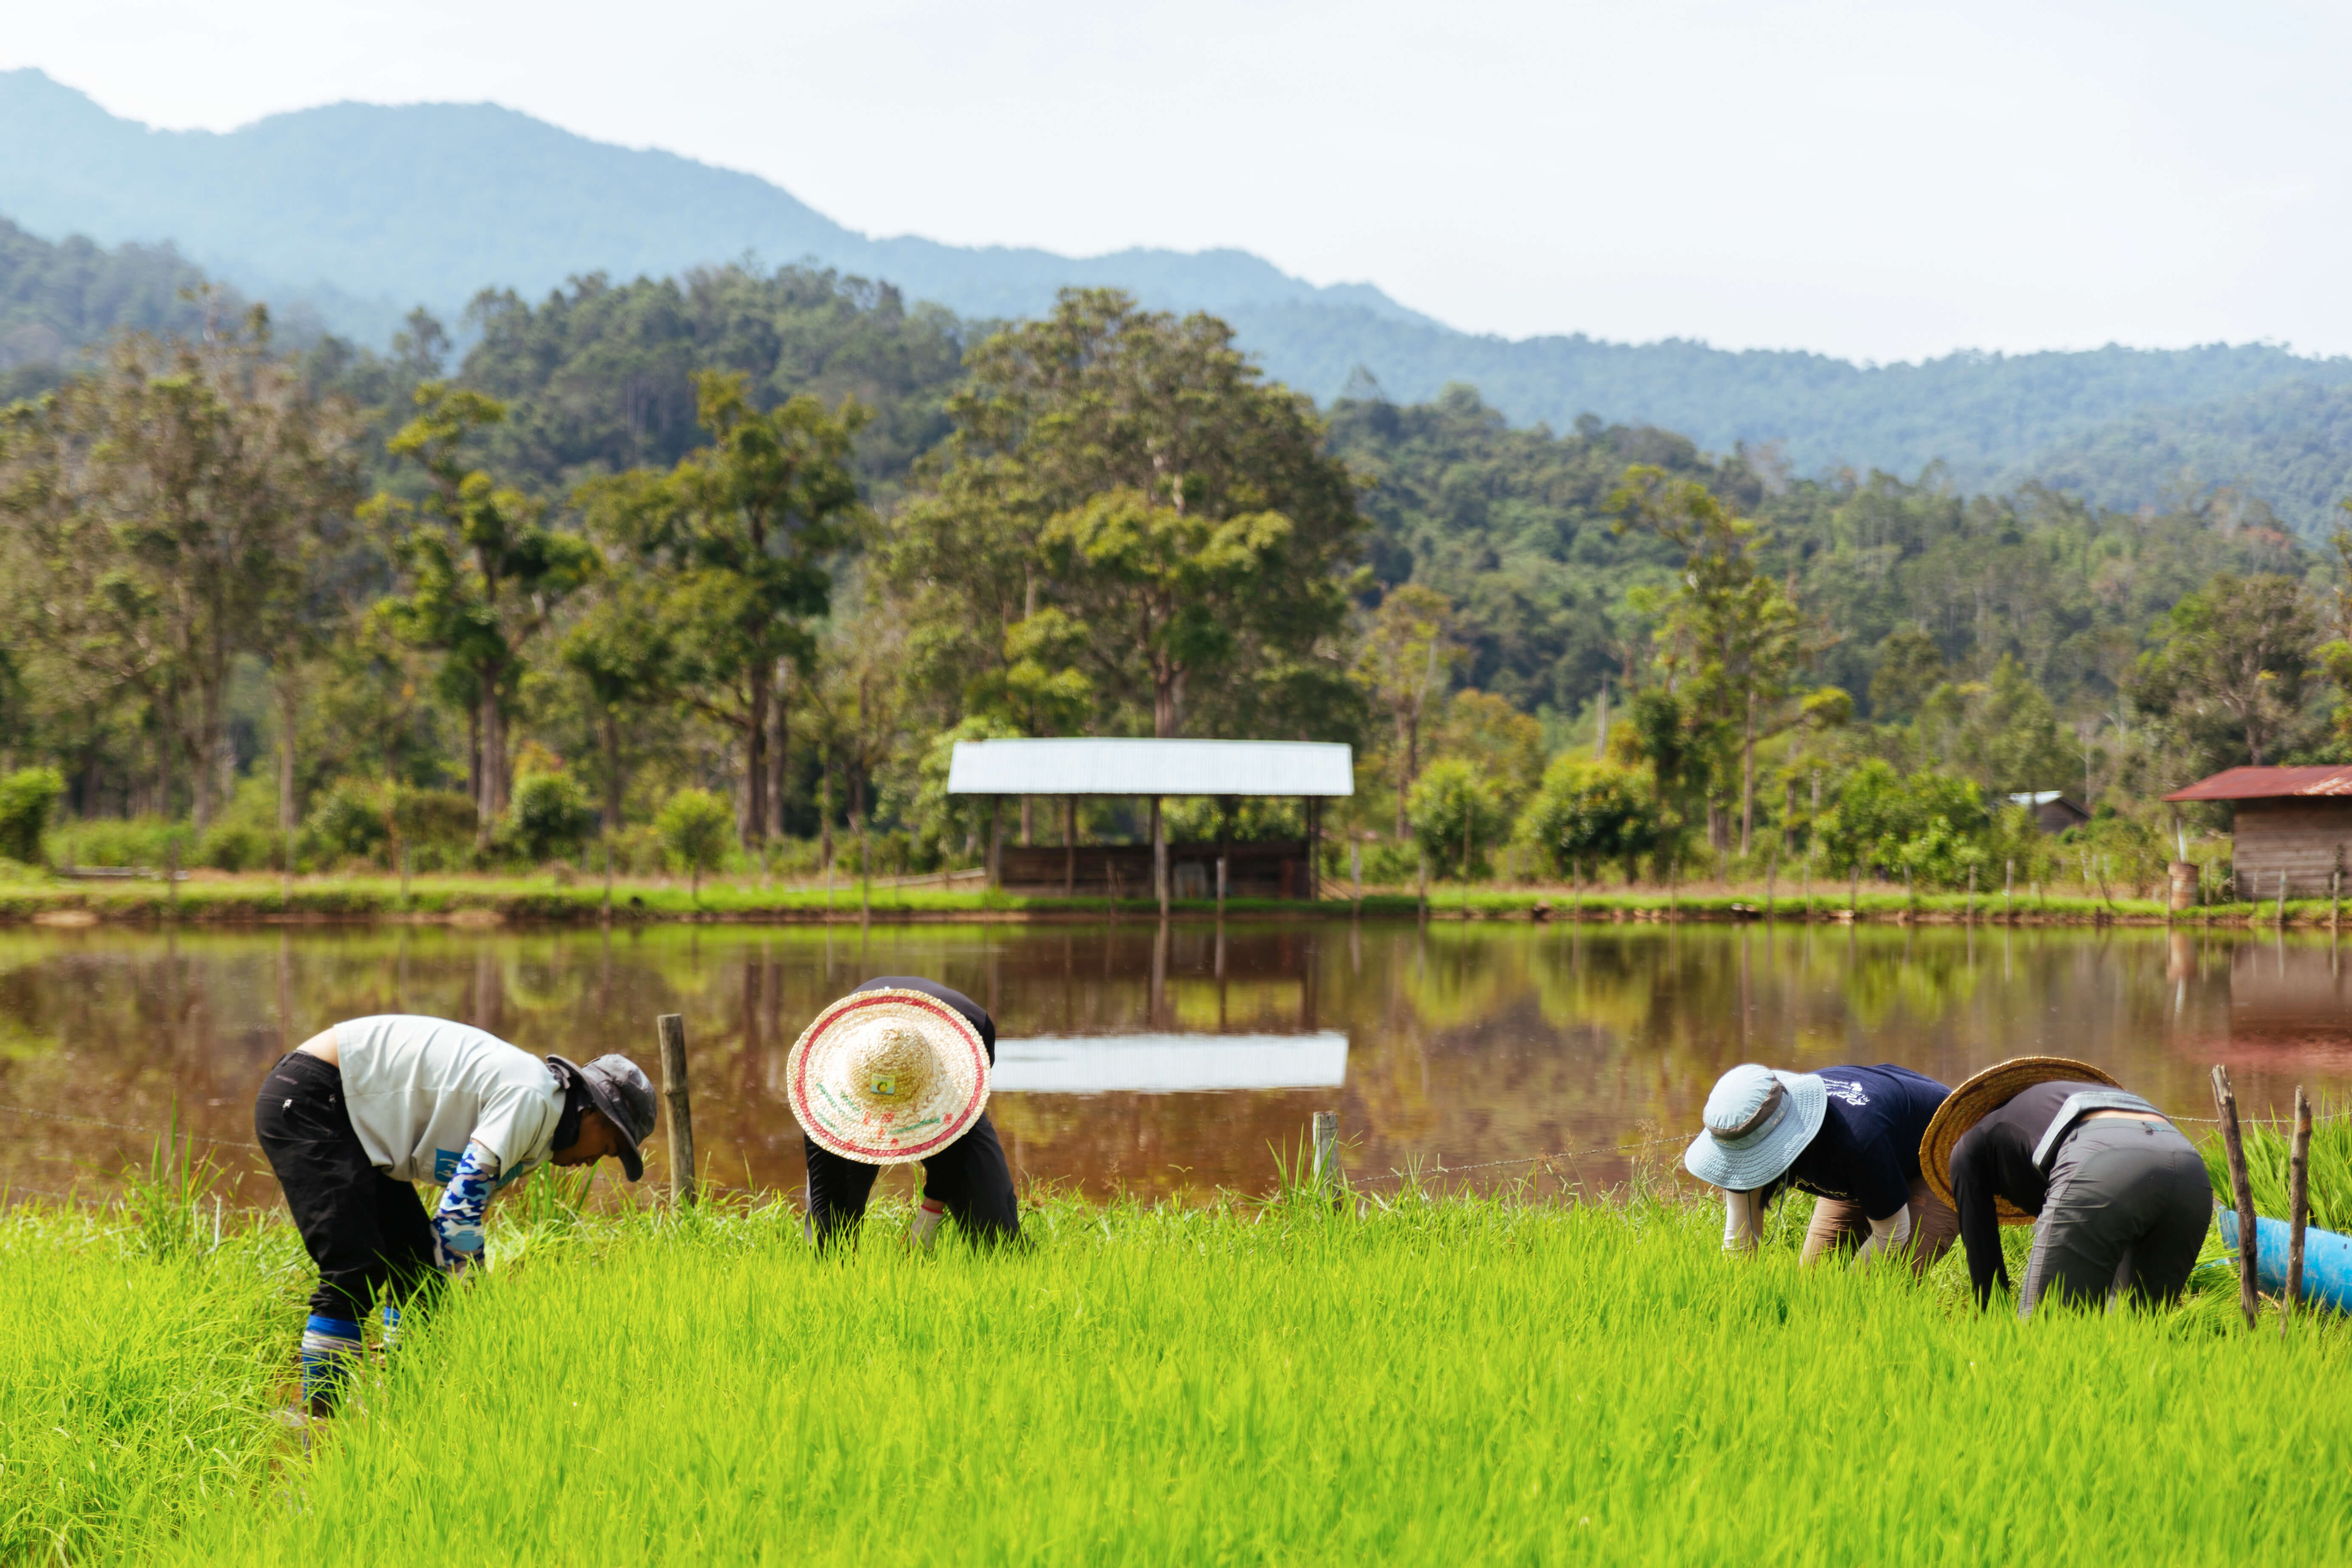 Farm-to-table meals? Long Semadoh has it all, from the chance to try rice farming, taste some truly amazing rice, and learn about the culture behind every bite. 